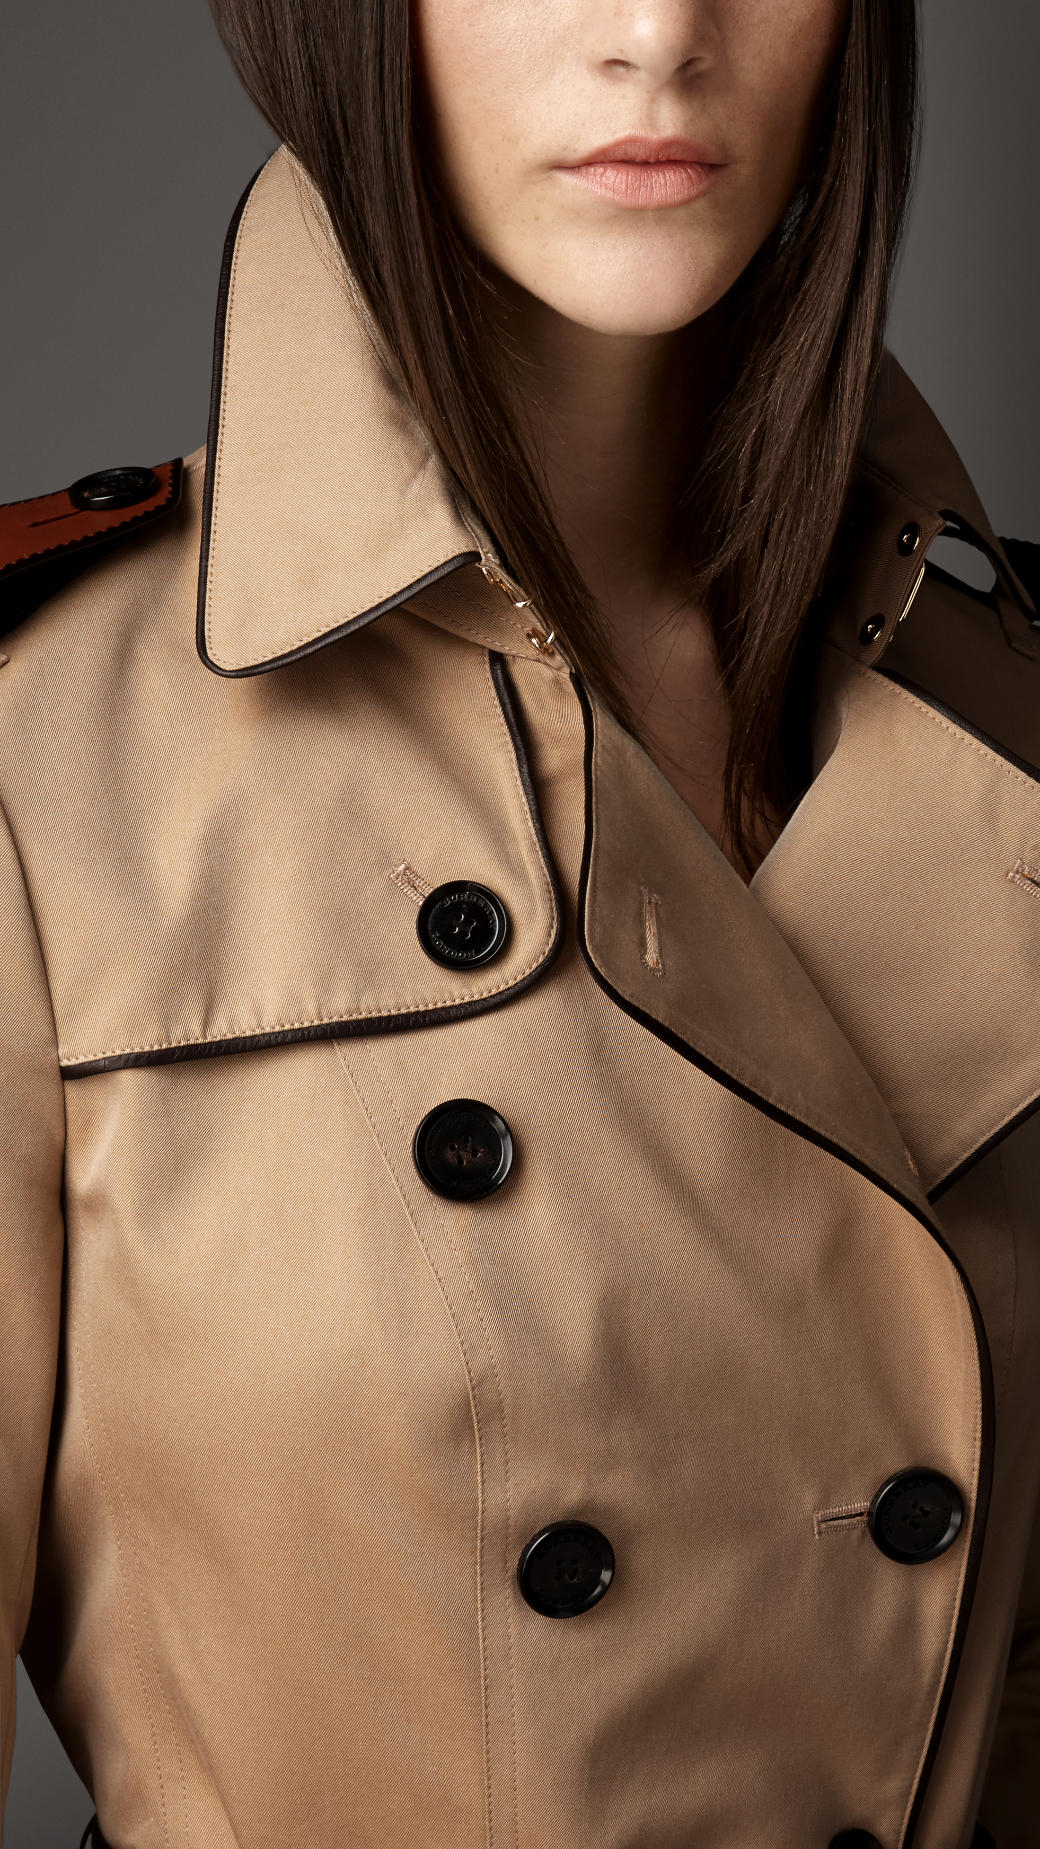 Burberry Mid-Length Leather Trim Trench Coat in Natural | Lyst